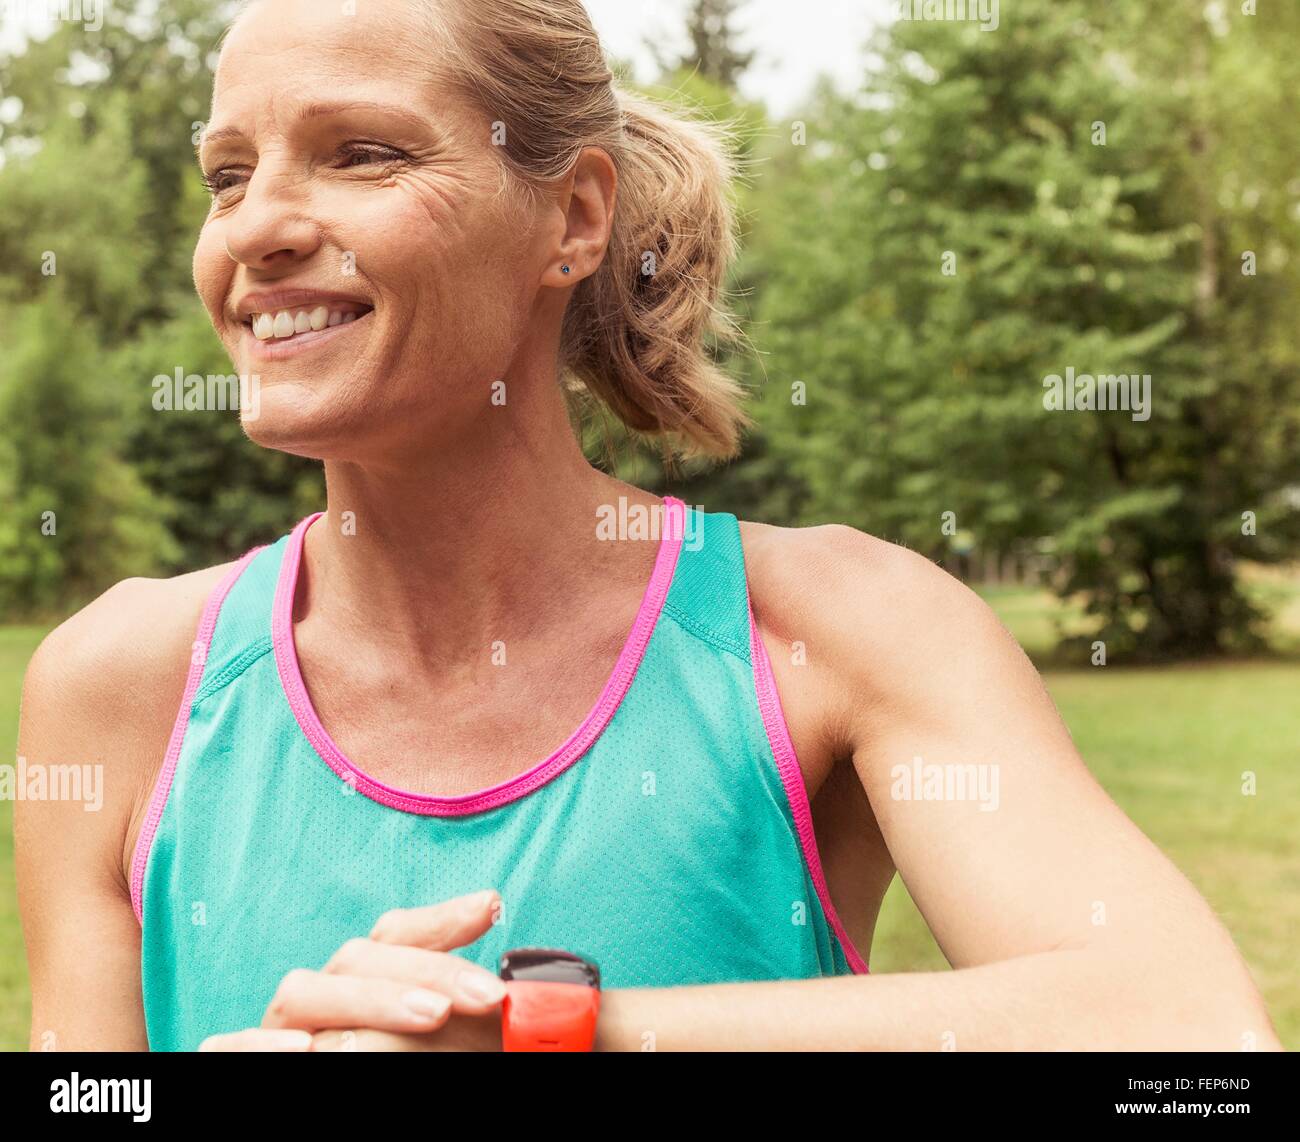 Mature woman, working out, outdoors, smiling Stock Photo